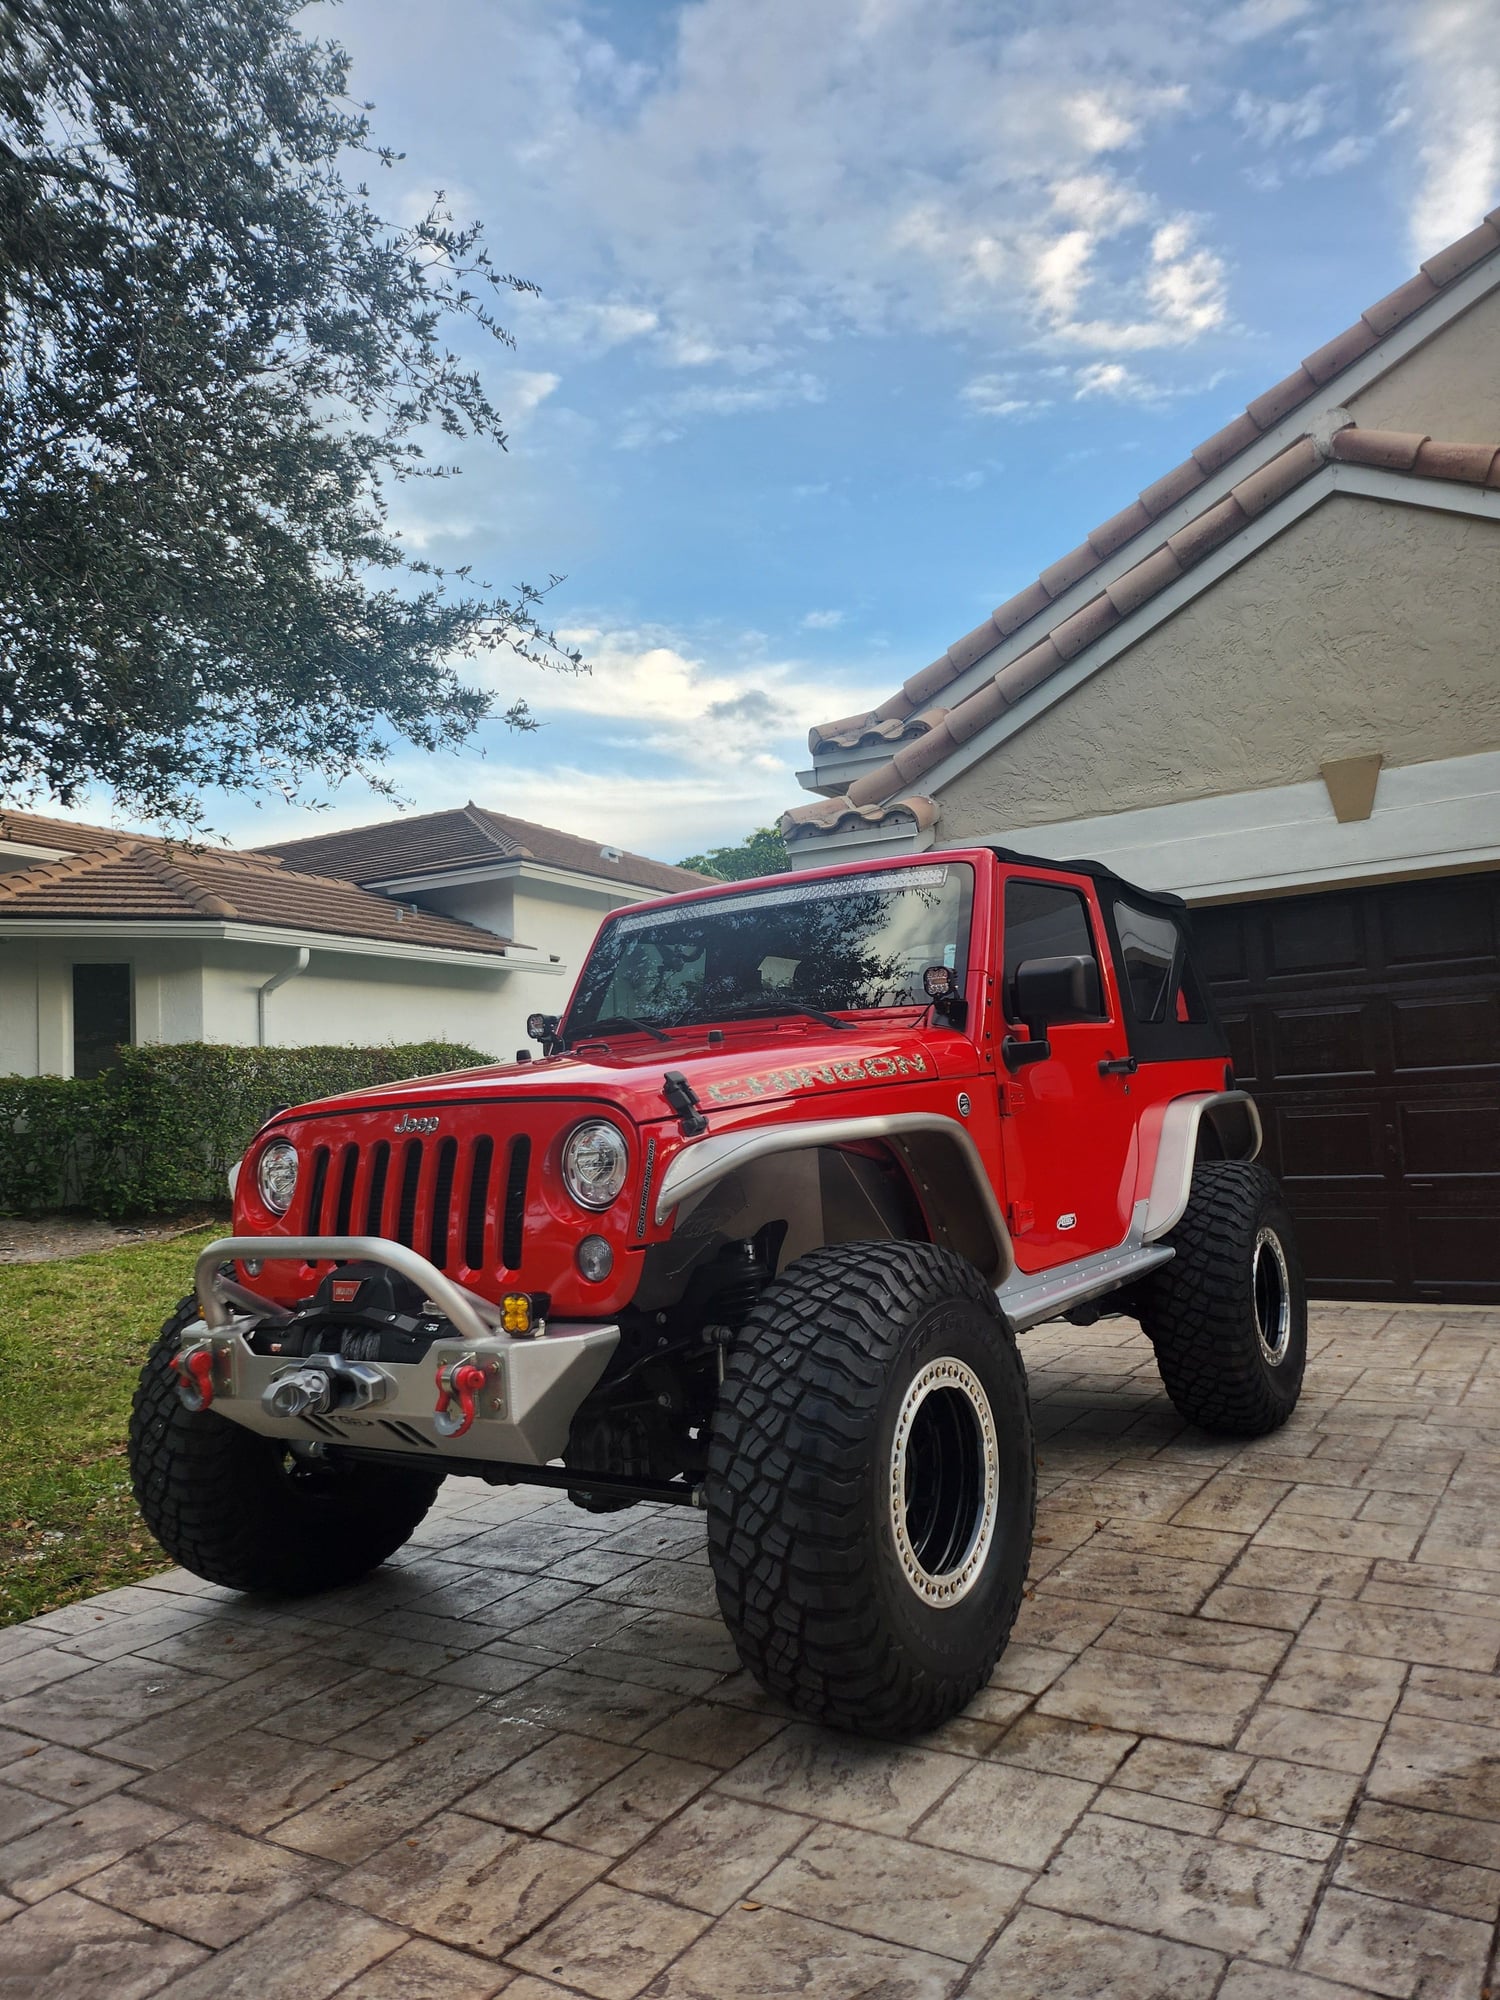 2018 Jeep Wrangler - Jeep Rubicon - Used - VIN 1C4BJWCG8JL802314 - 37,500 Miles - 6 cyl - 4WD - Automatic - Truck - Red - Coral Springs, FL 33076, United States